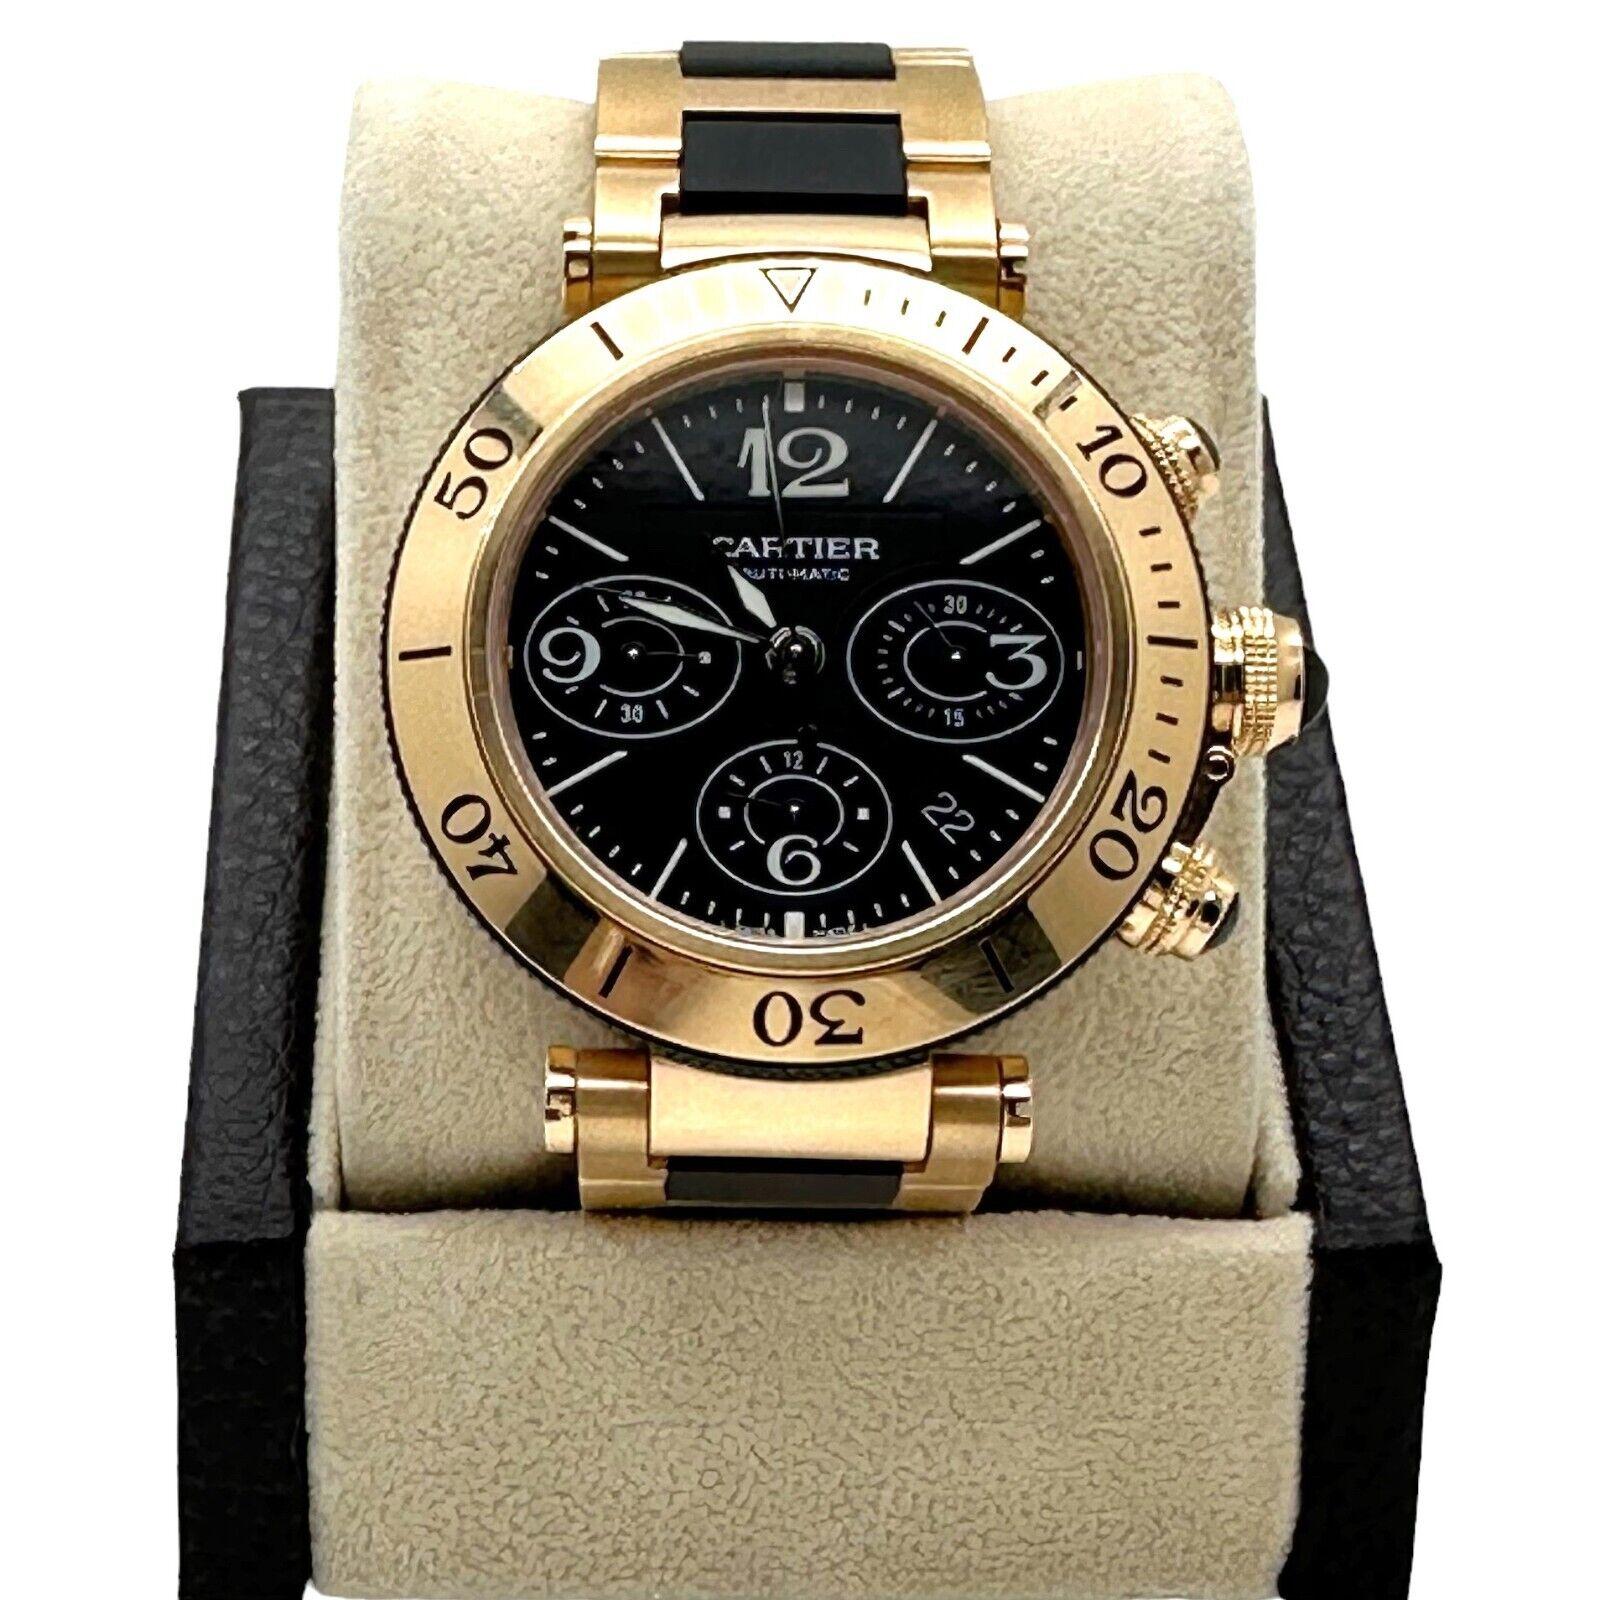 Cartier 3066 Pasha Seatimer Chronograph 18K Rose Gold Ceramic Box Paper 2019 In Excellent Condition For Sale In San Diego, CA